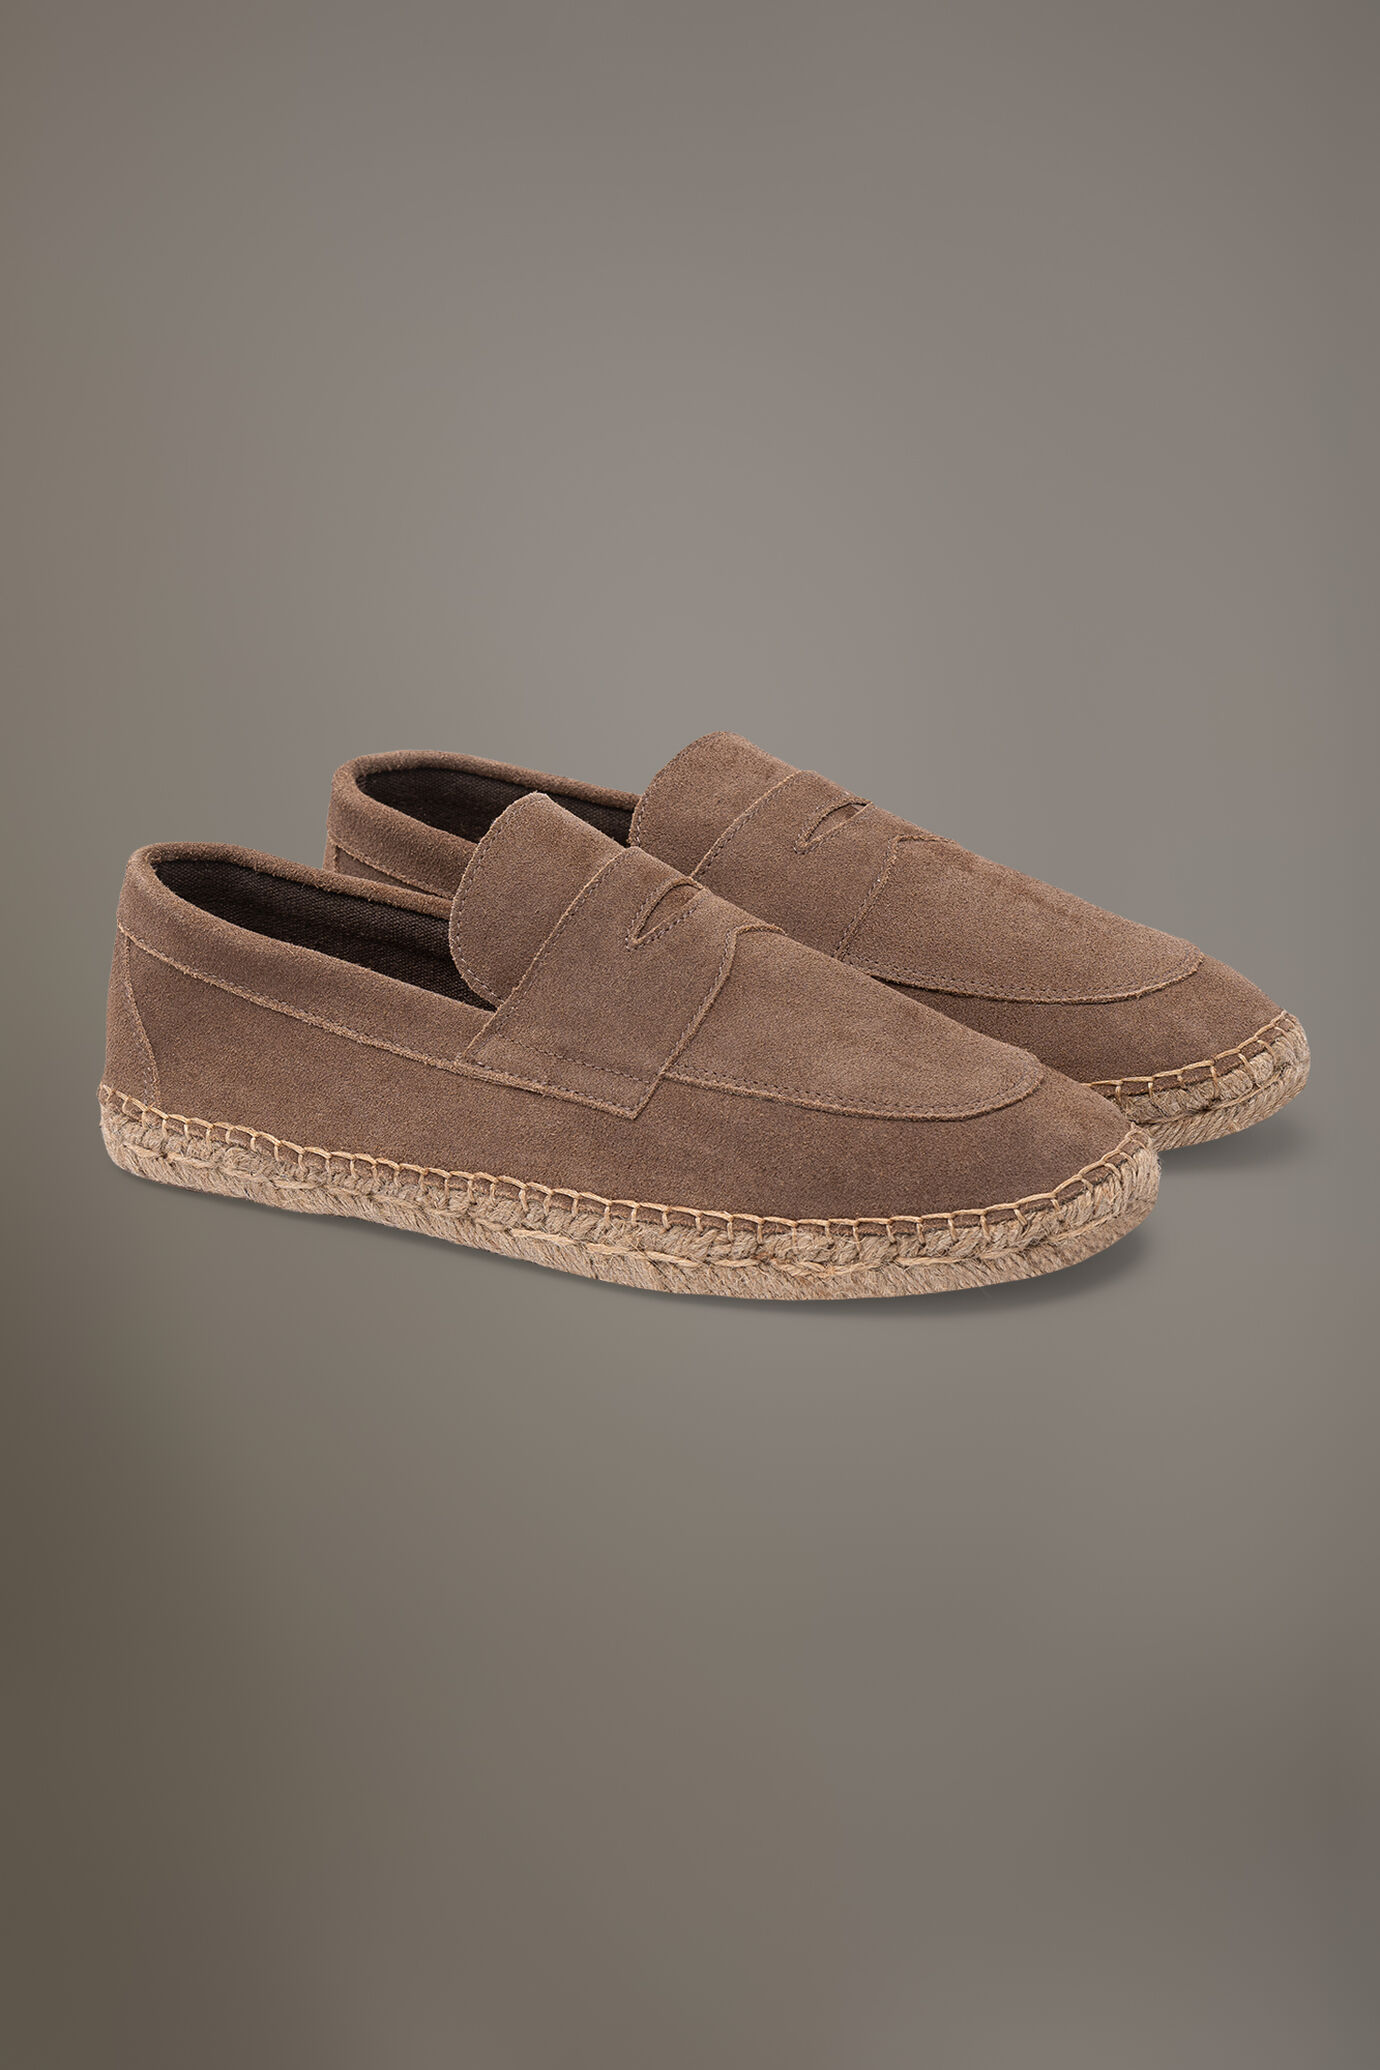 Suede espadrillas shoes 100% leather with rubber and cord sole